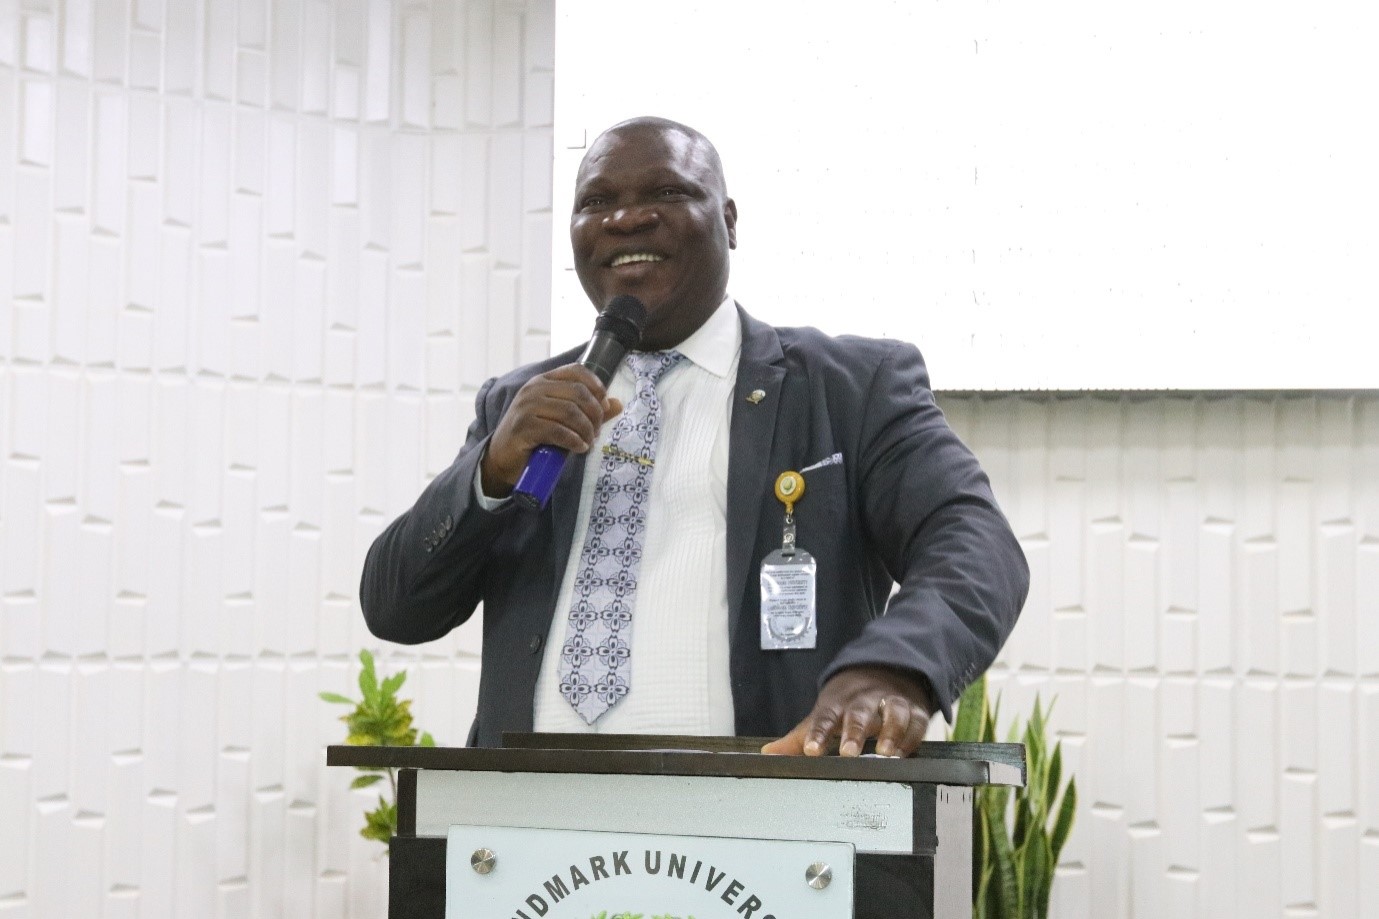 The Vice-Chancellor, Professor Adeniyi Olayanju giving his Welcome Remarks with great excitement at the 2017/2018 Academic Session Omega Semester Staff Welcome Assembly